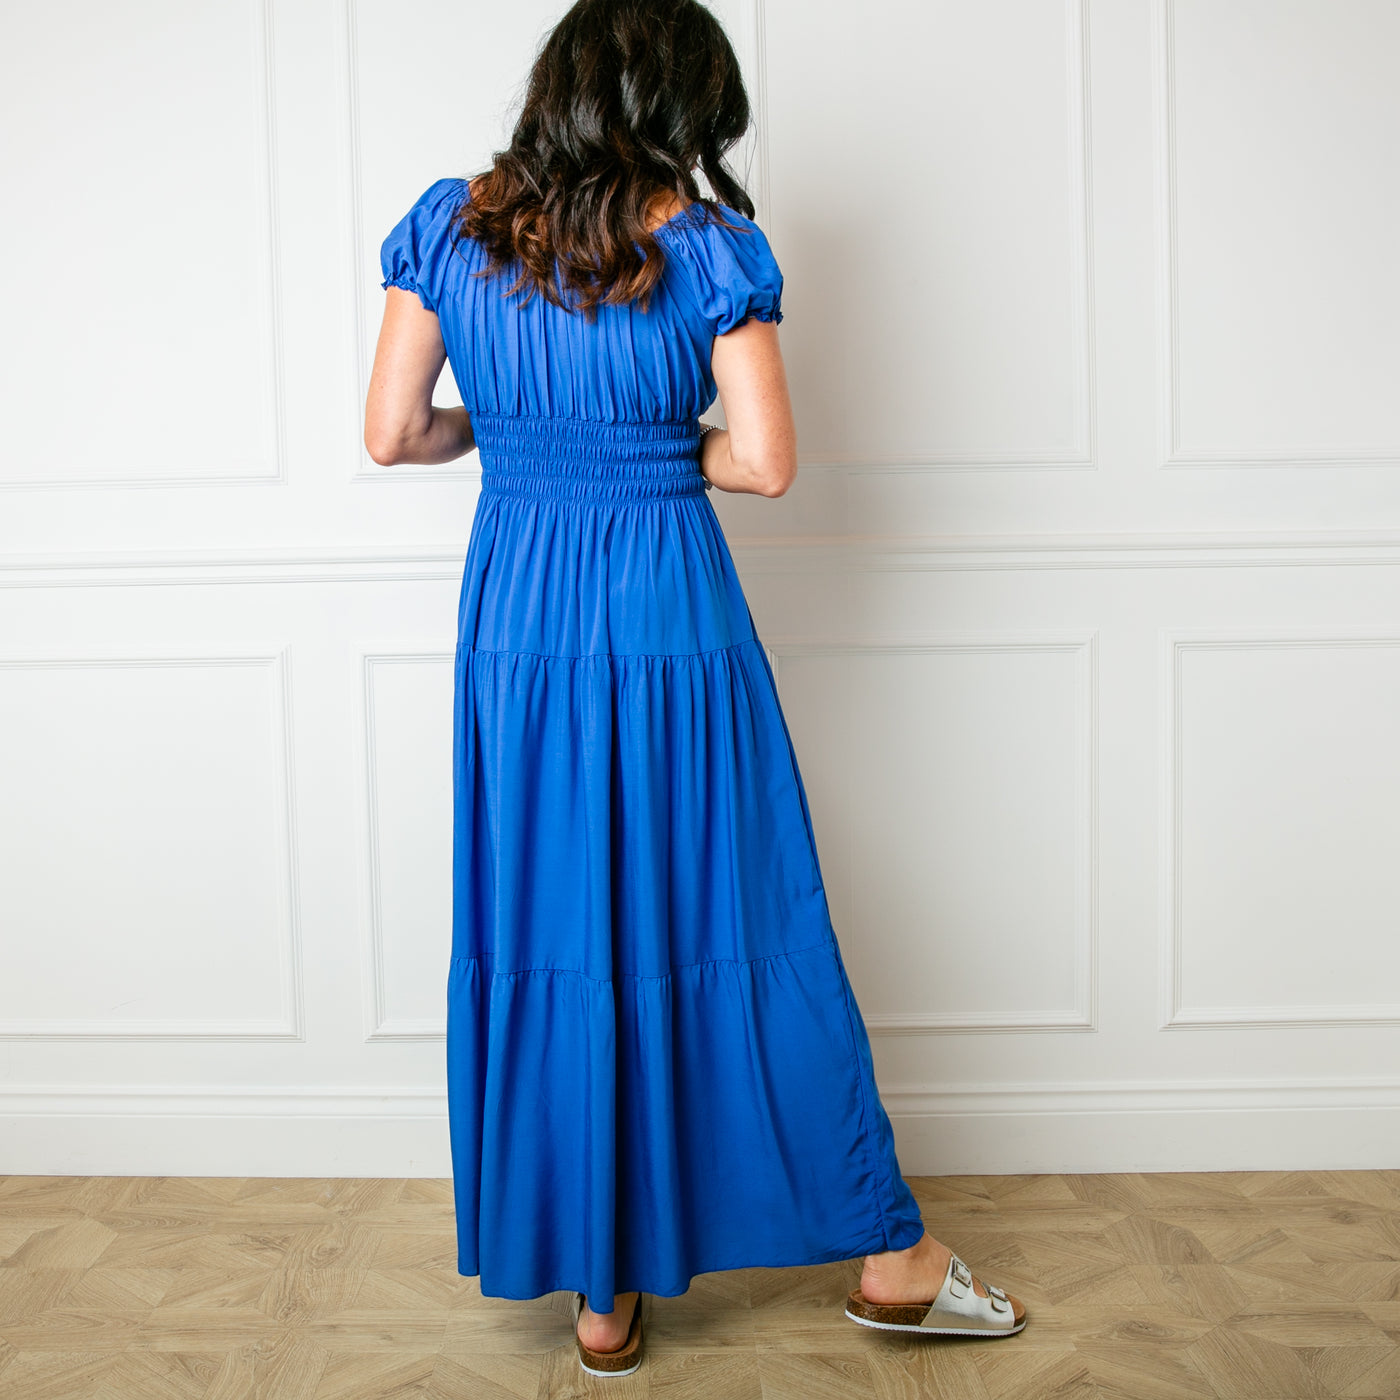 The royal blue Button Front Maxi Dress with a tiered maxi skirt, perfect for your summer holiday